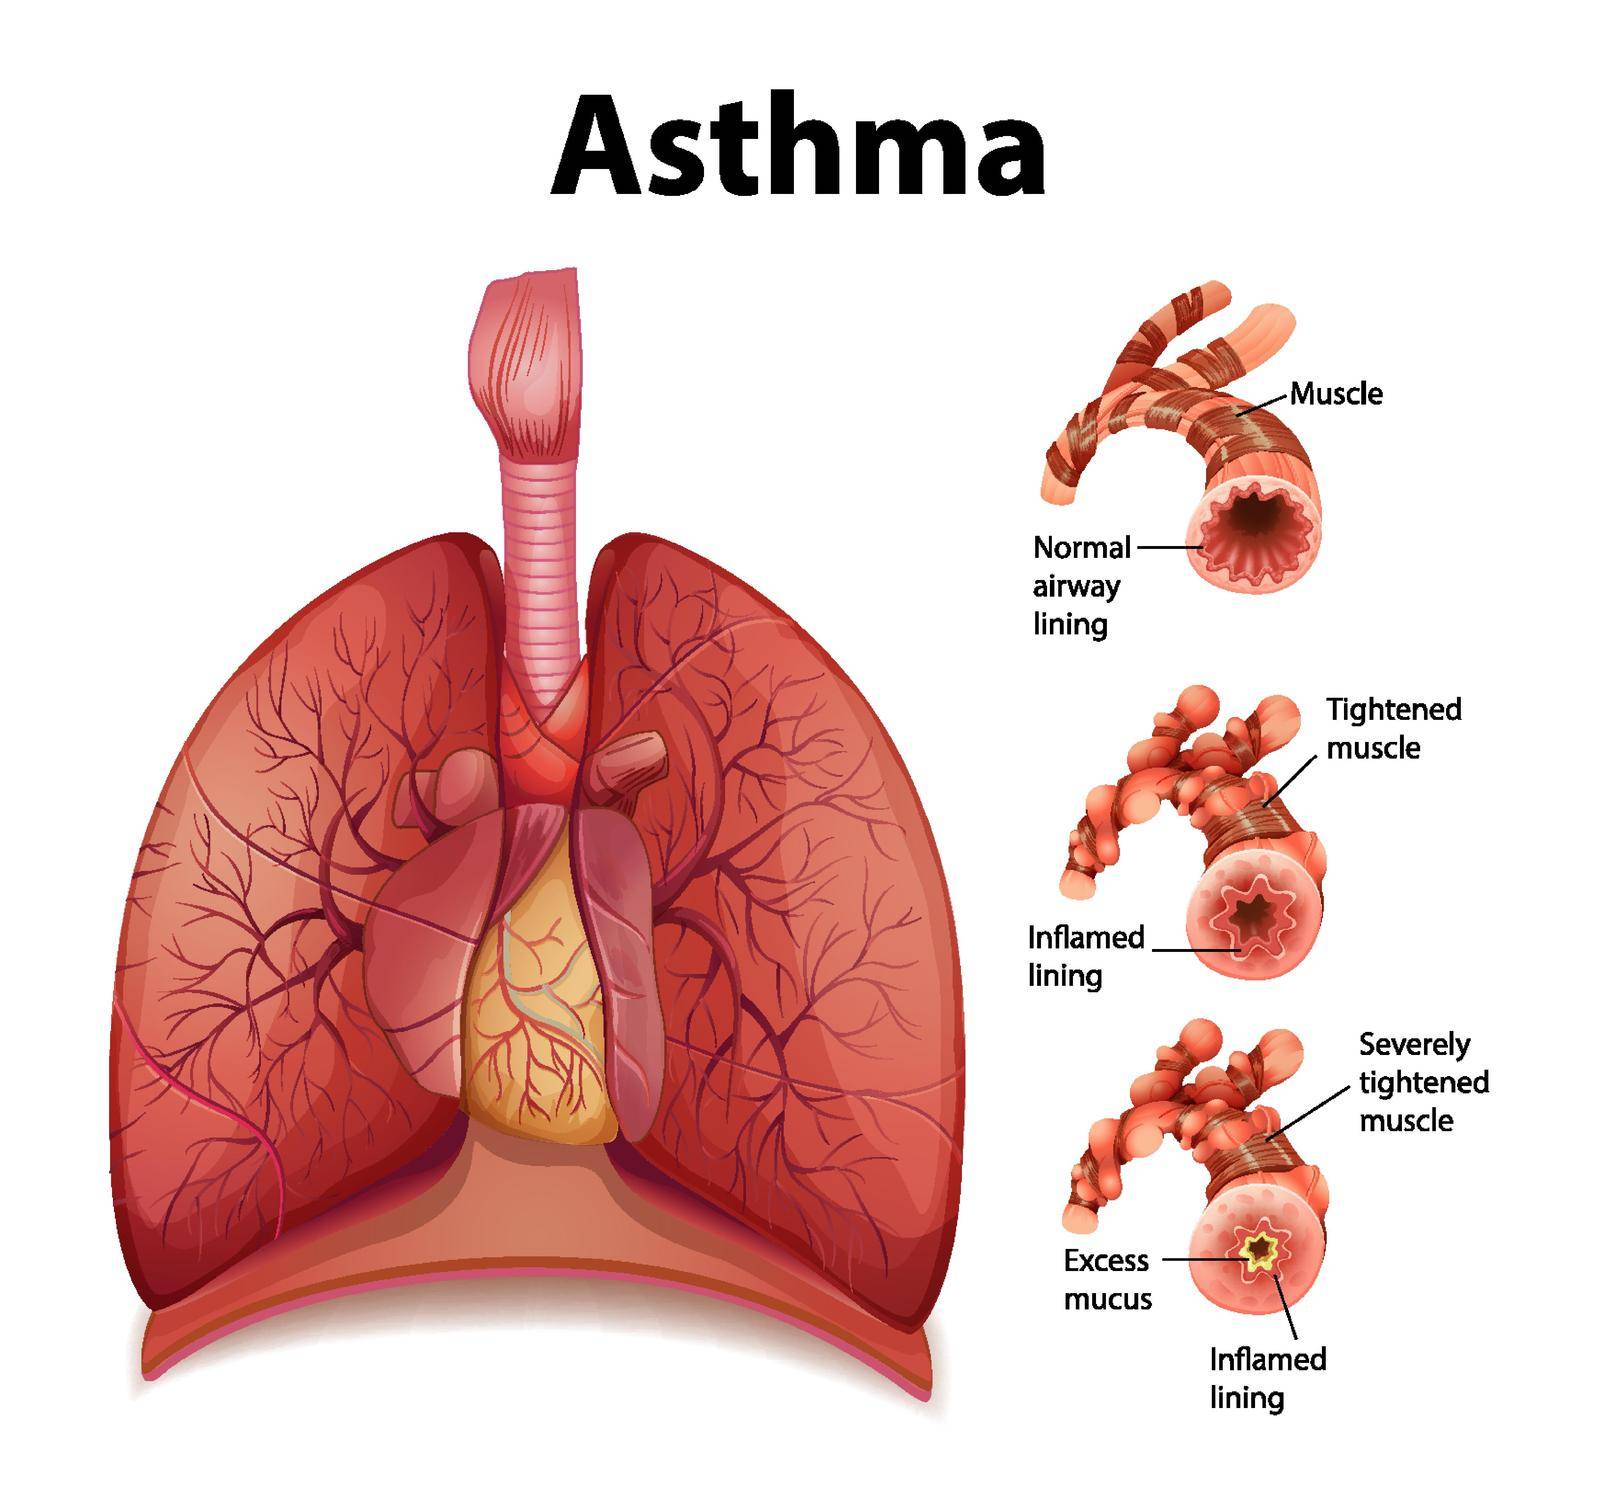 Comparison of healthy lung and Asthmatic lung by iimages